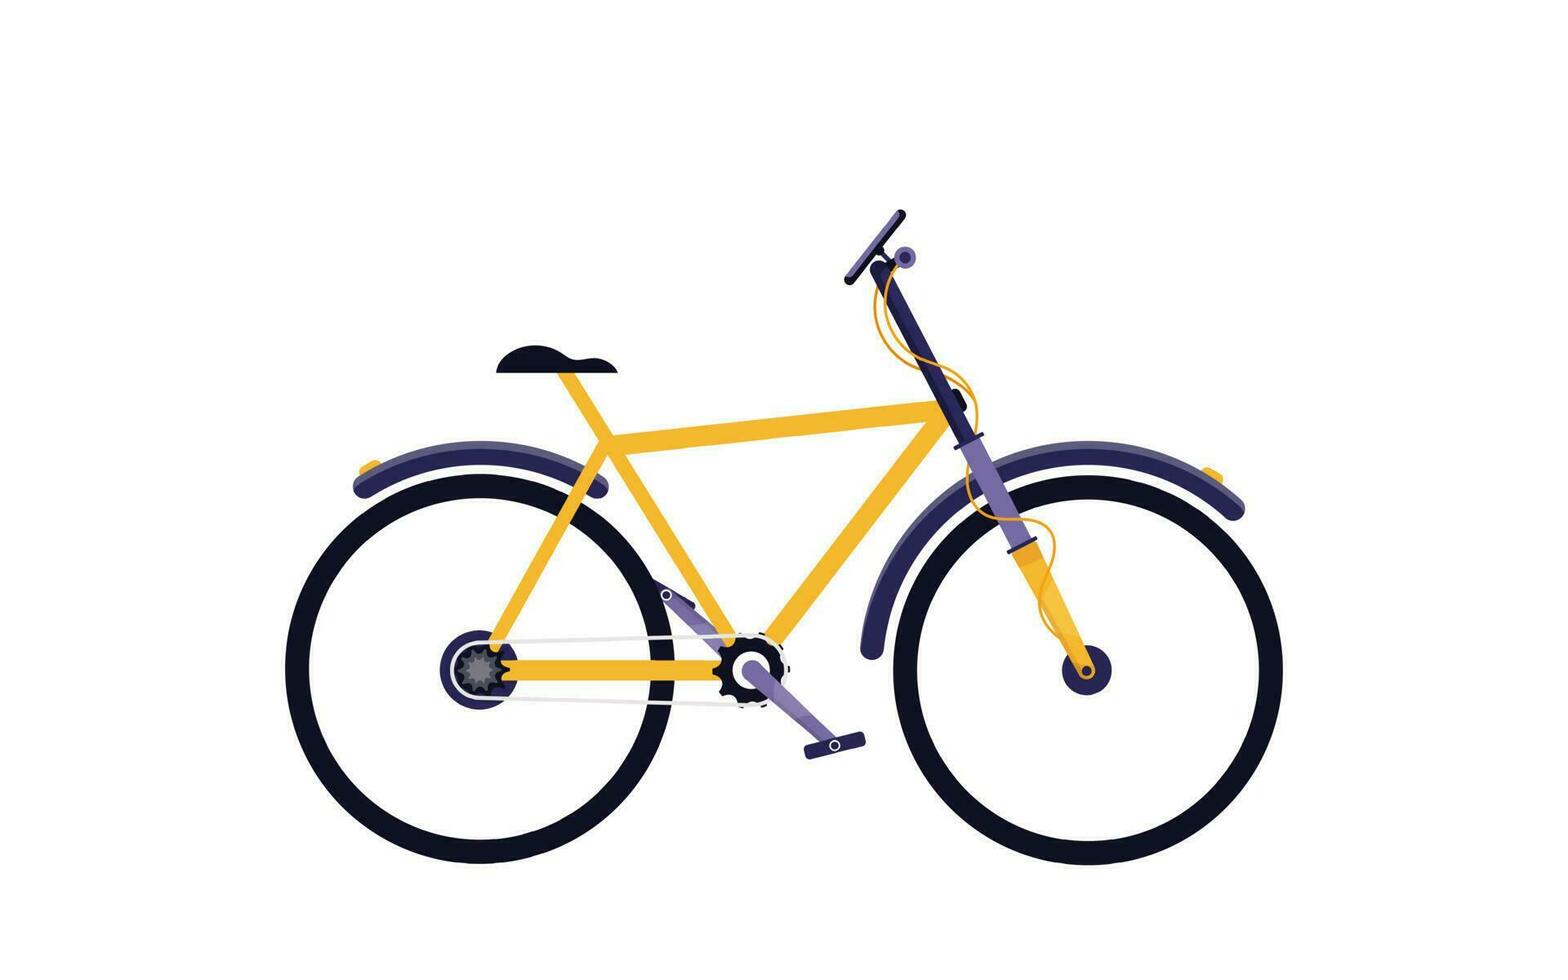 Track bike icon in flat color style. Bicycle racing road velodrome sport competition Olympic vector